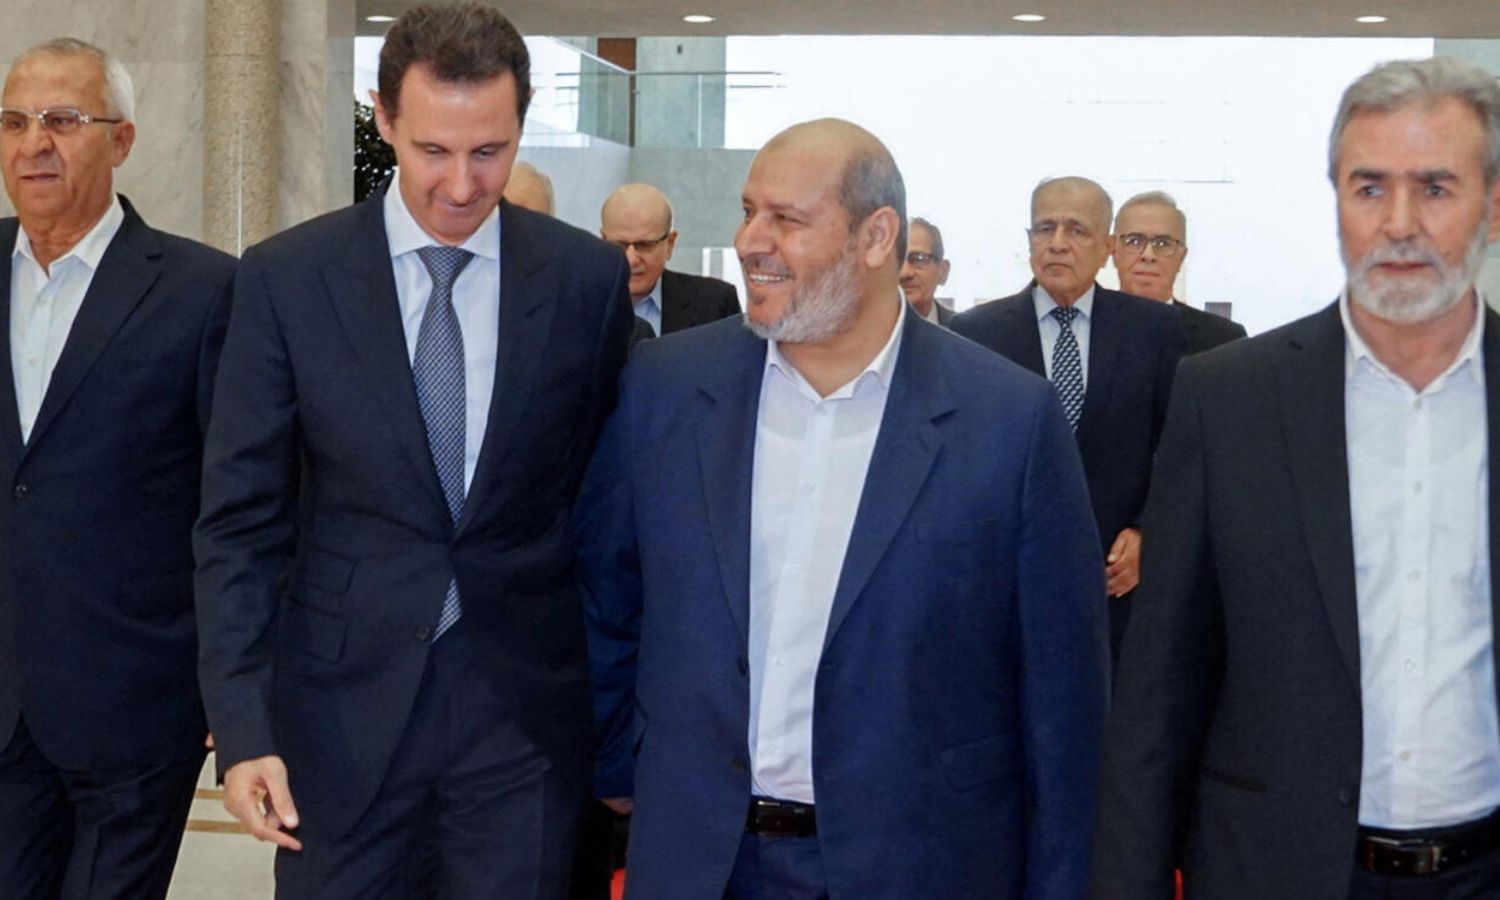 A delegation from the Palestinian factions, including “Hamas” and “Palestine Islamic Jihad,” meets with the head of the Syrian regime, Bashar al-Assad, in Damascus - October 19, 2022 (Telegram/Syrian Presidency)